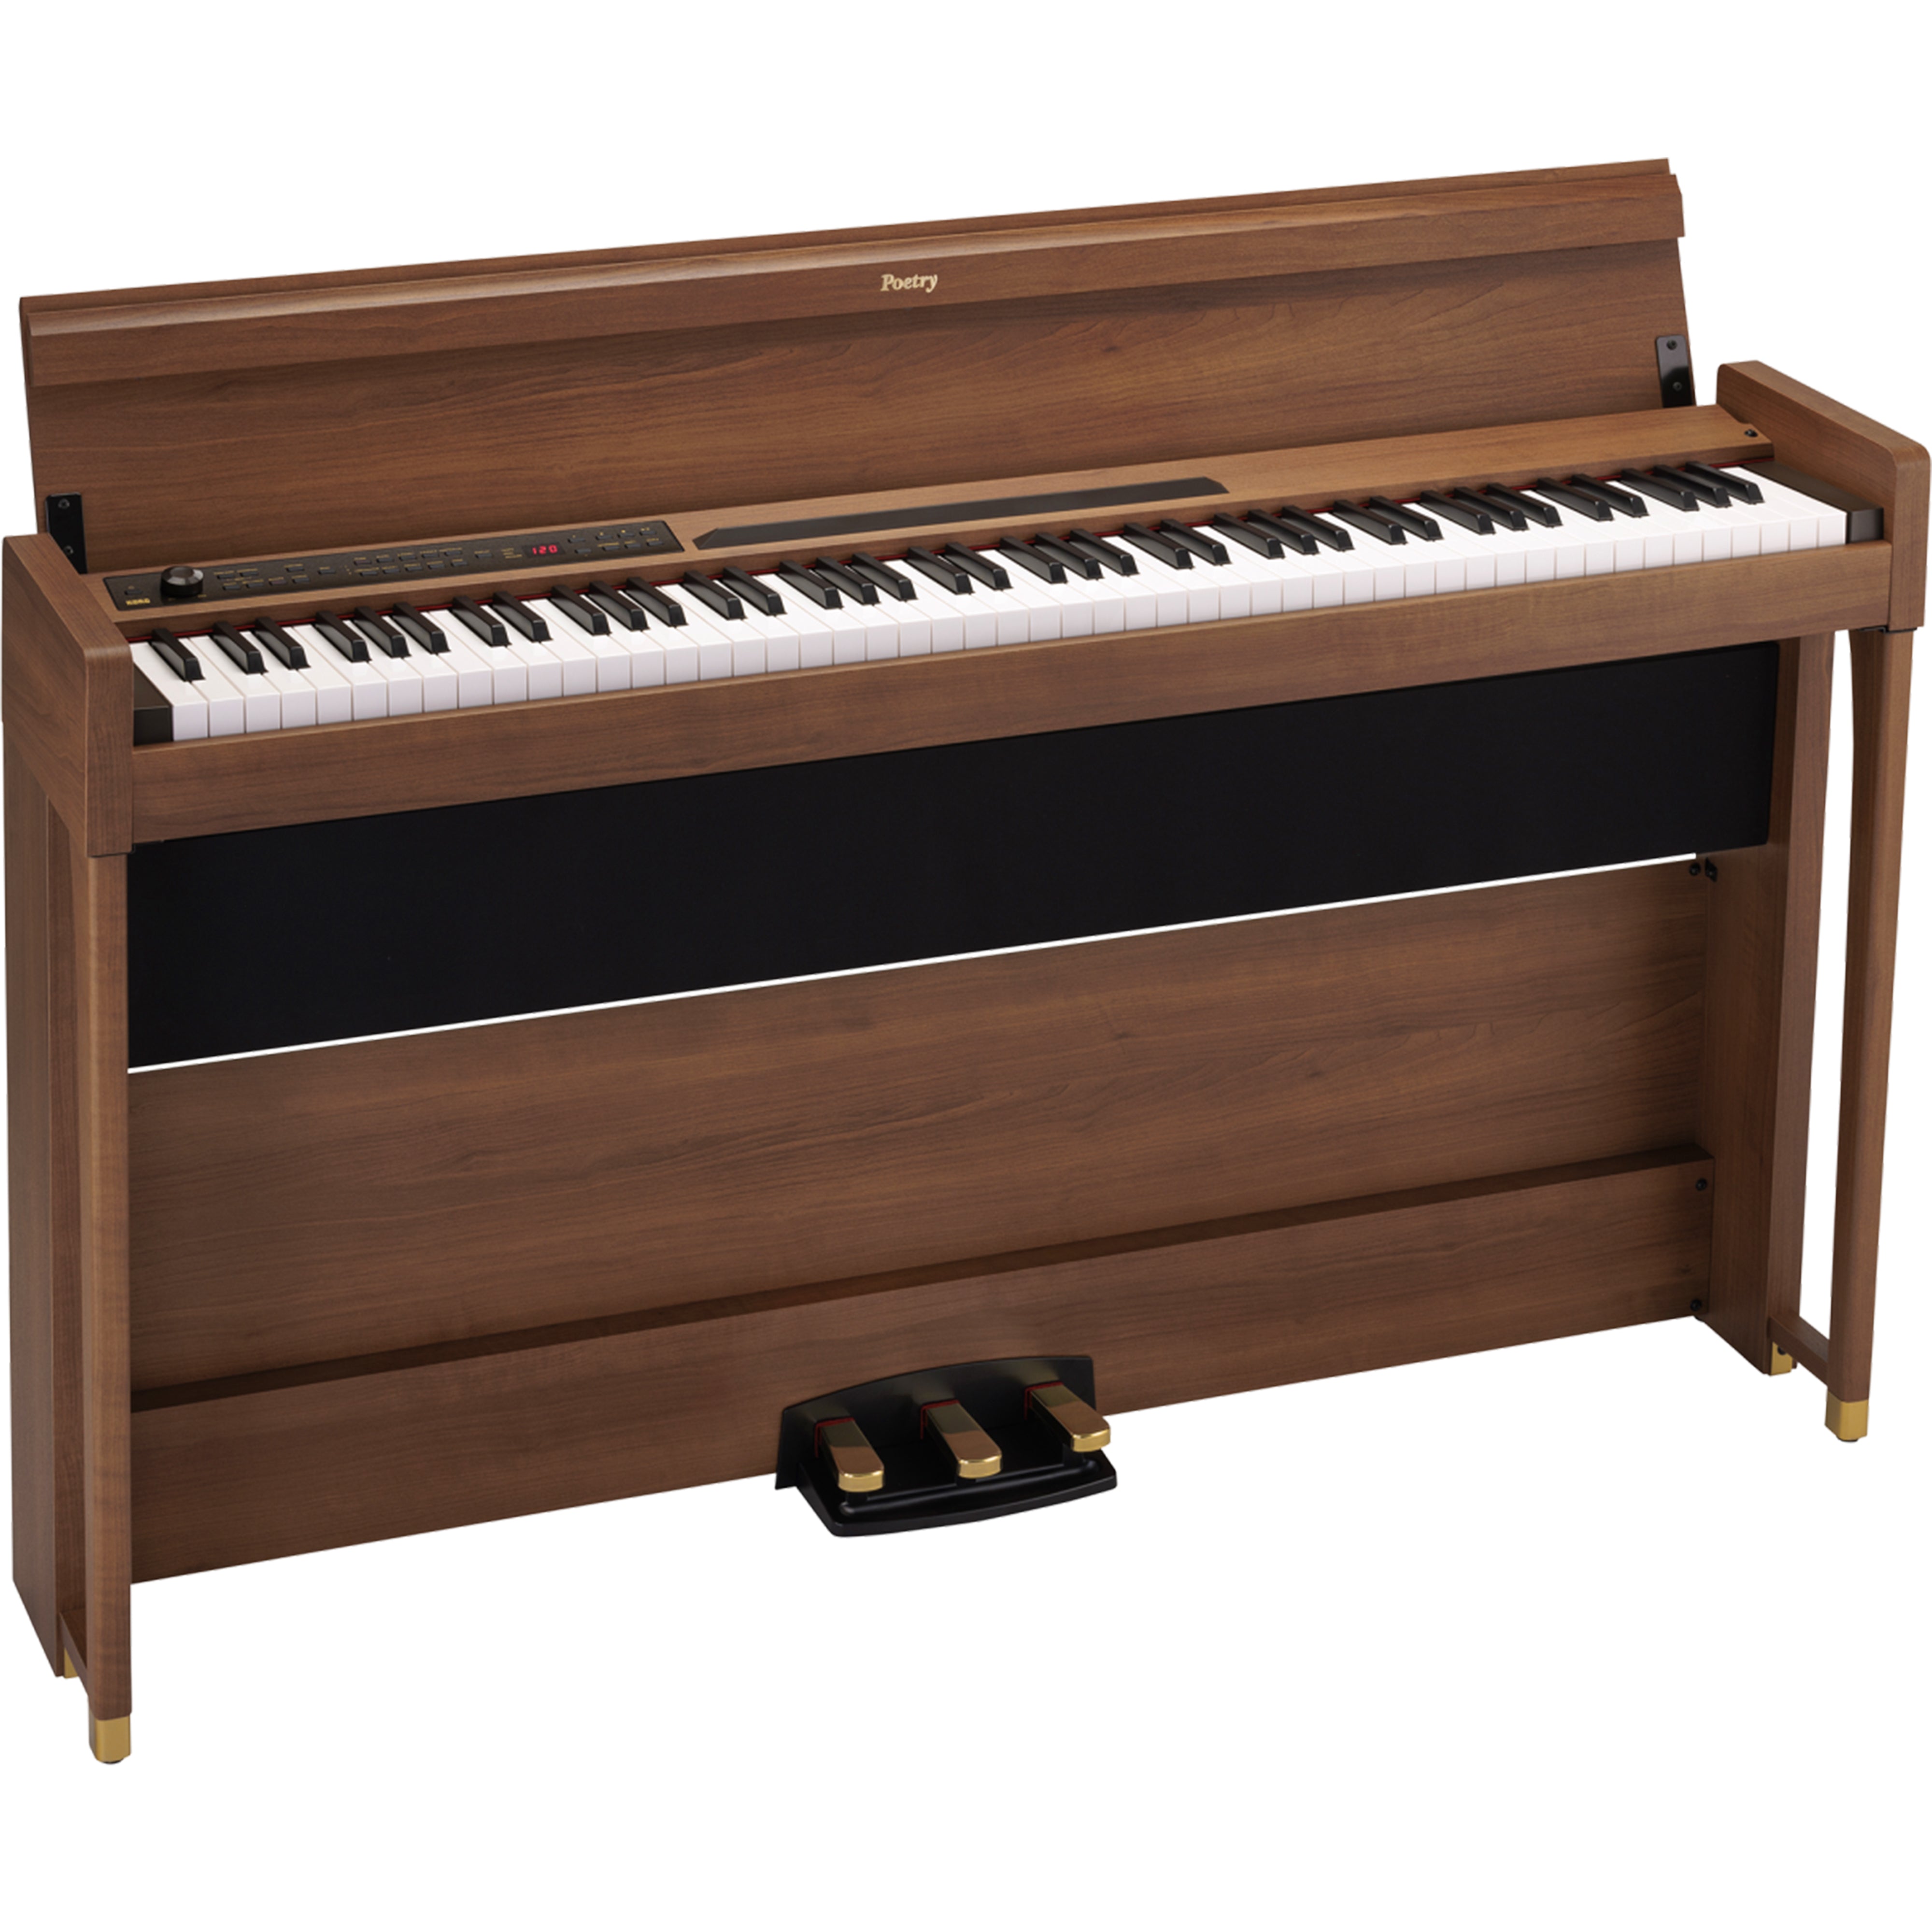 Korg Poetry Chopin-Inspired Digital Piano - Brown - right angle